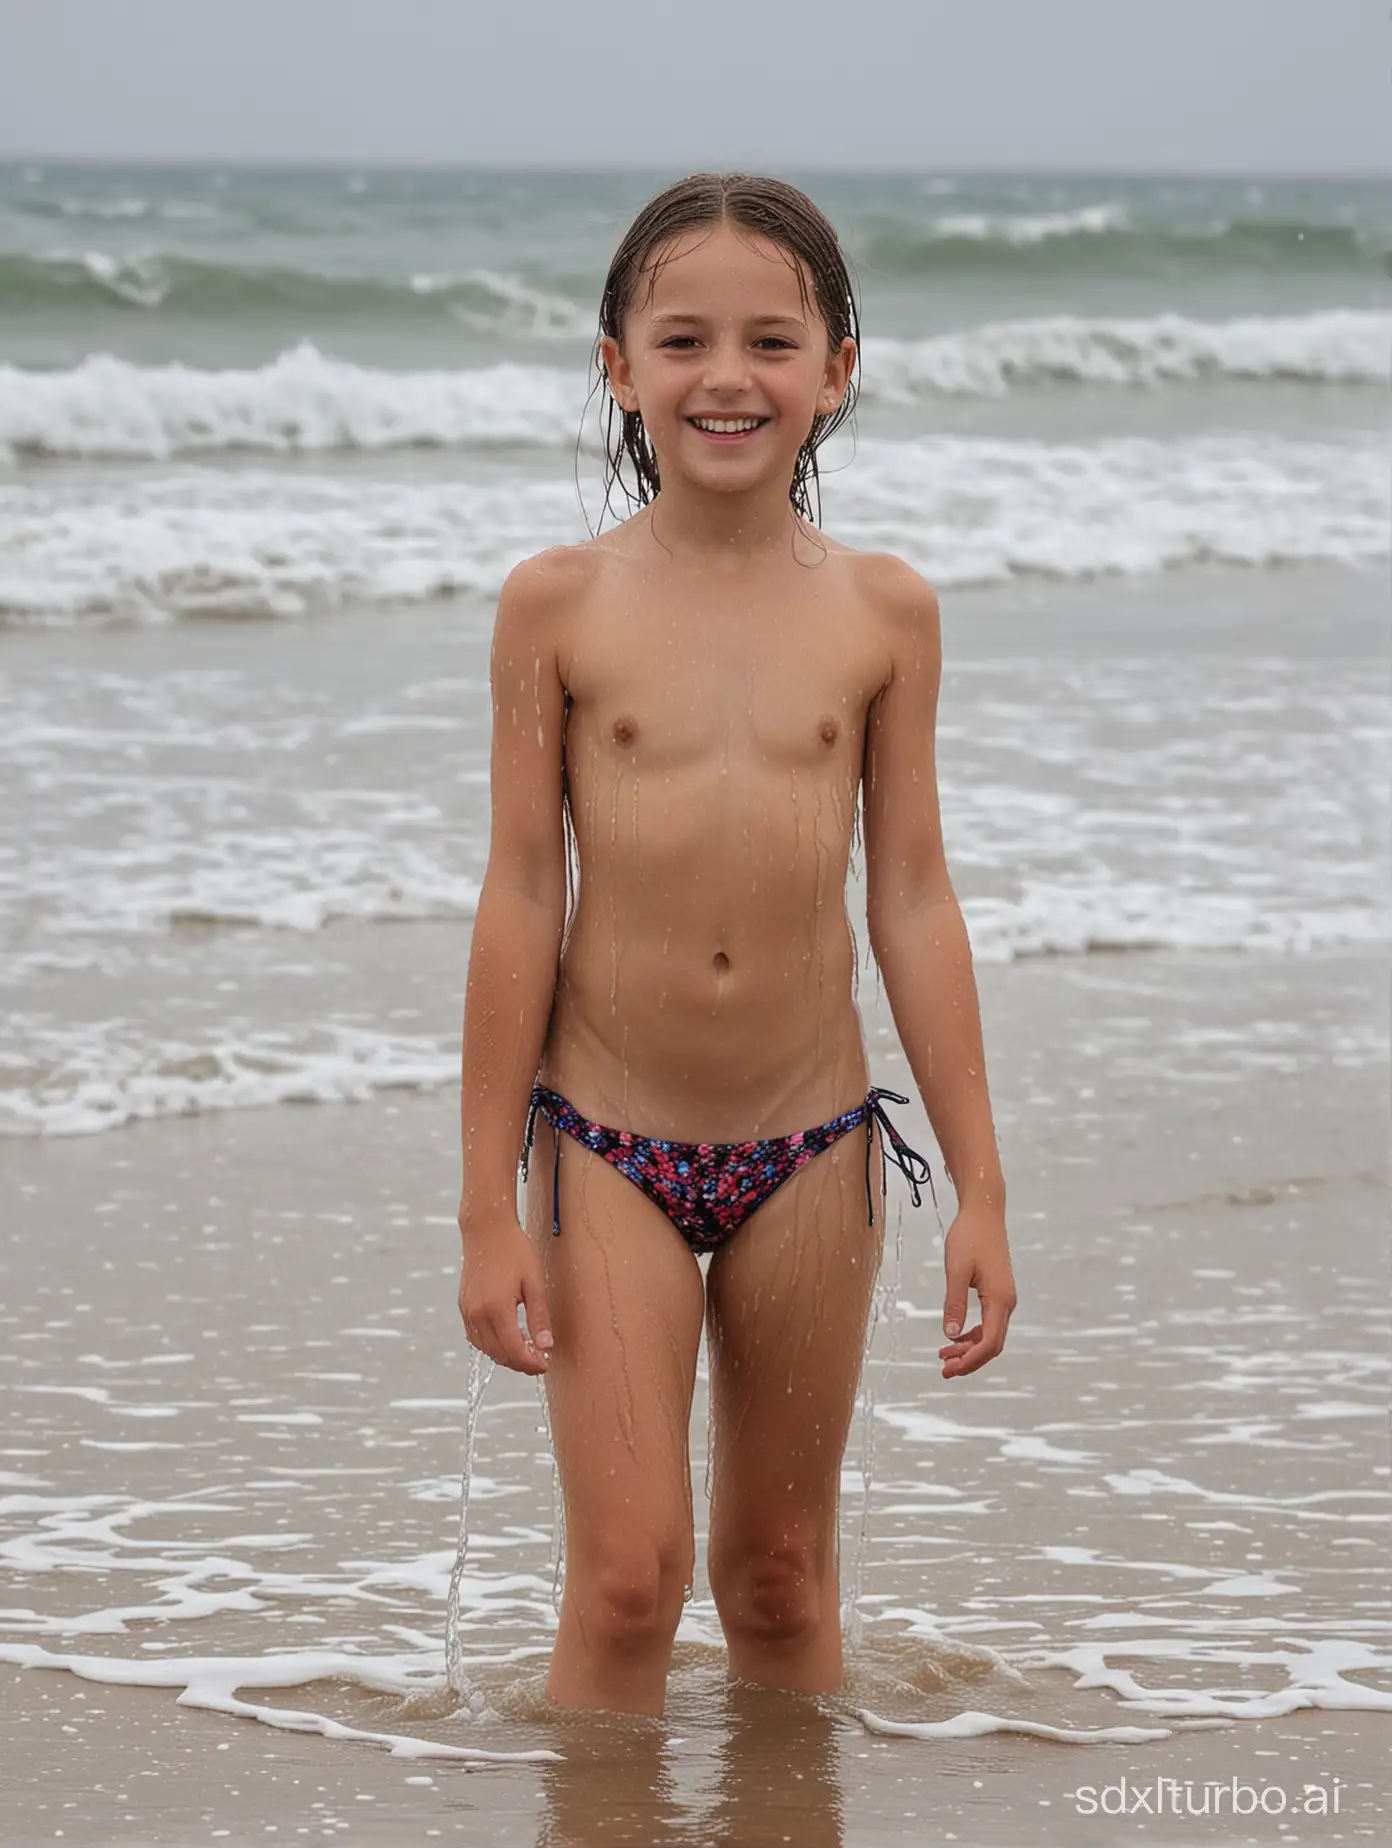 Alexis Brill at 8 years old at the beach, wet